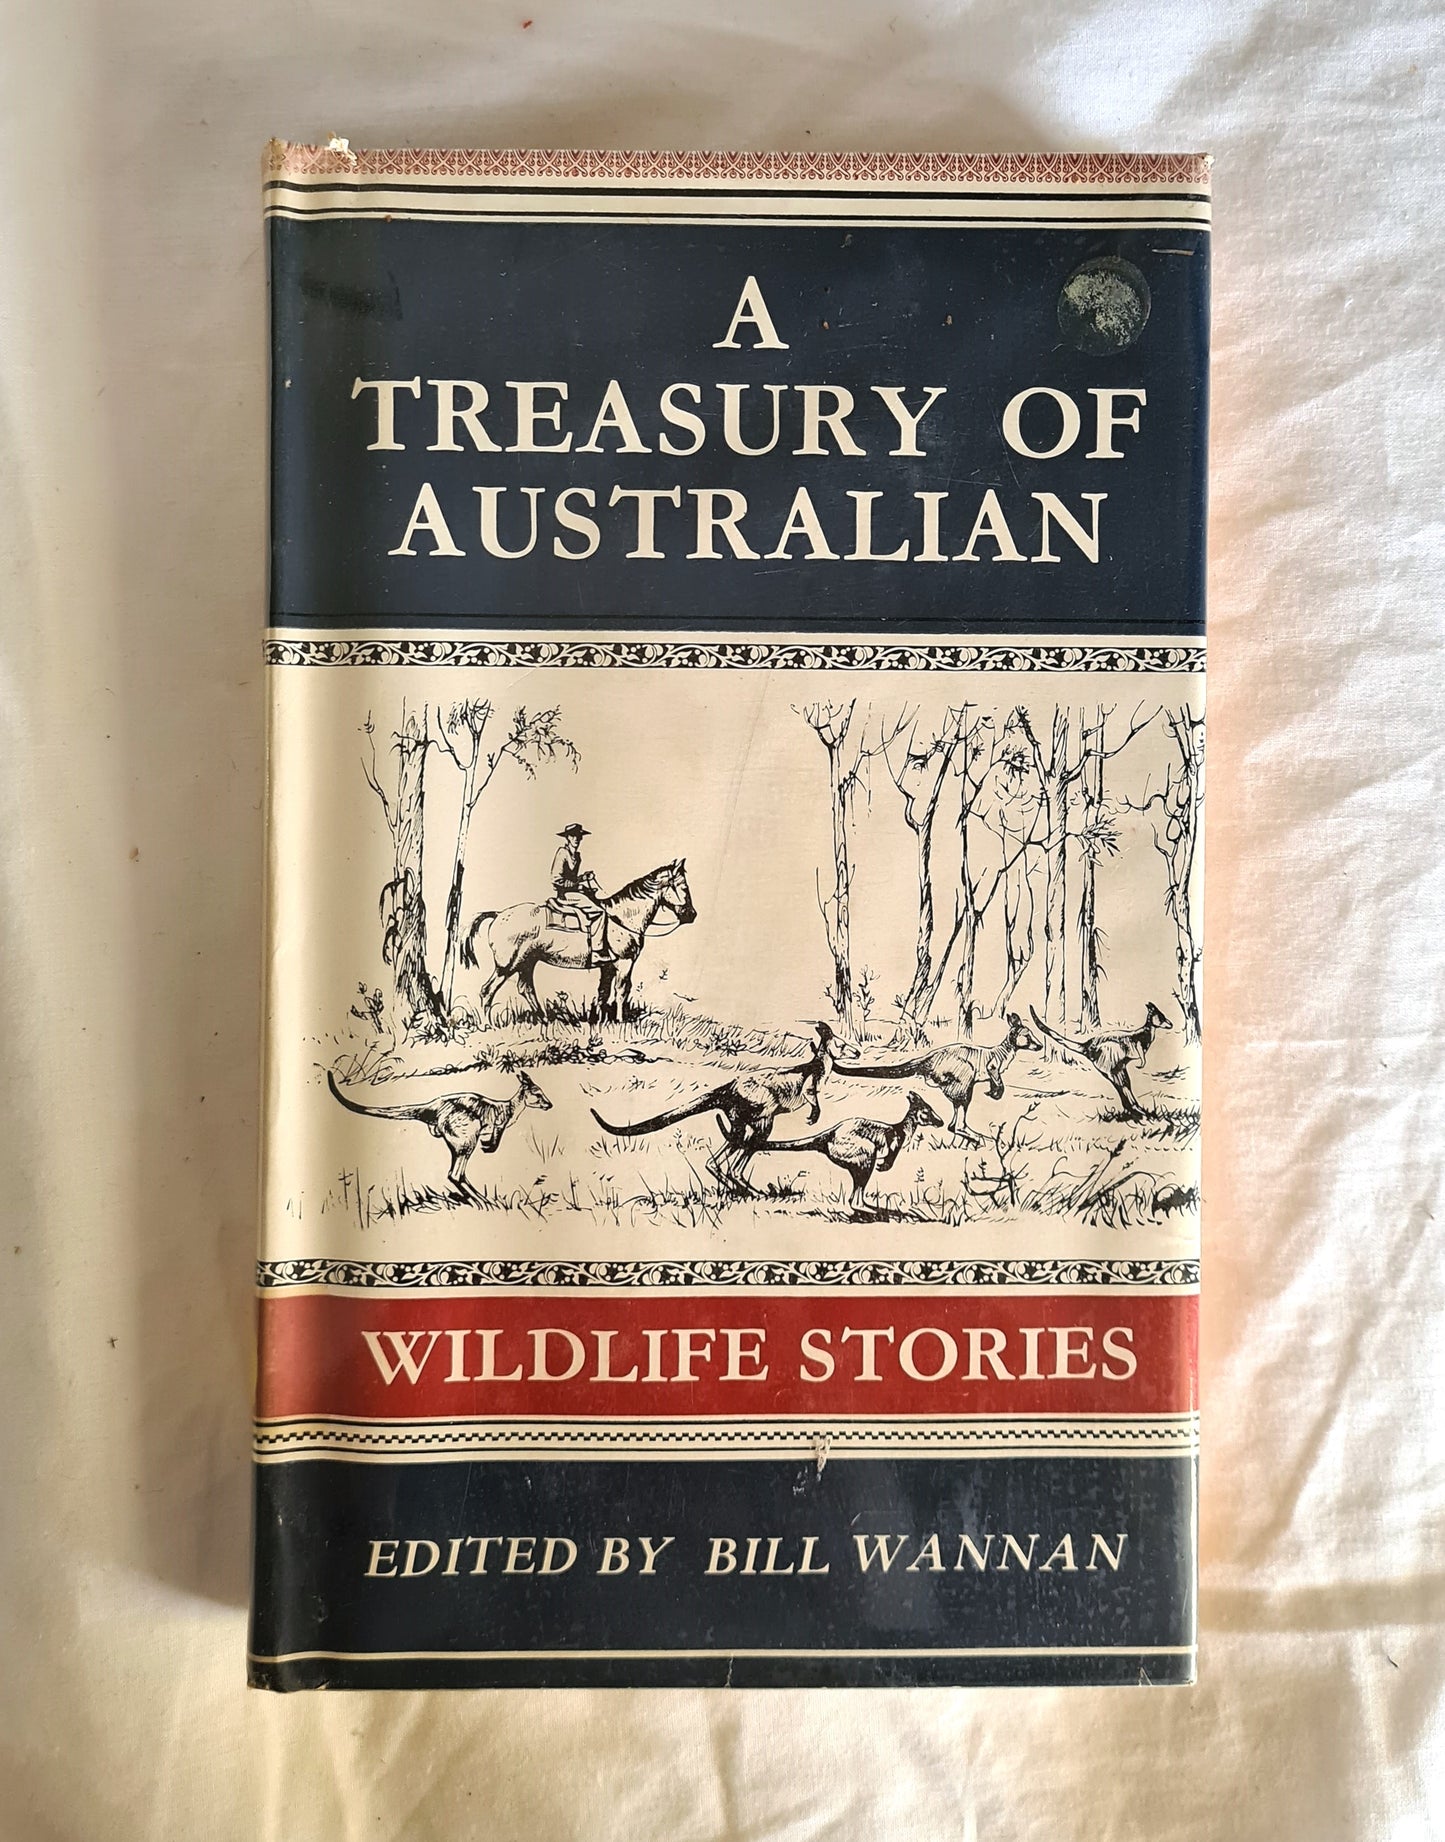 A Treasury of Australian Wildlife Stories  by Bill Wannan  Illustrated by Robin Hill